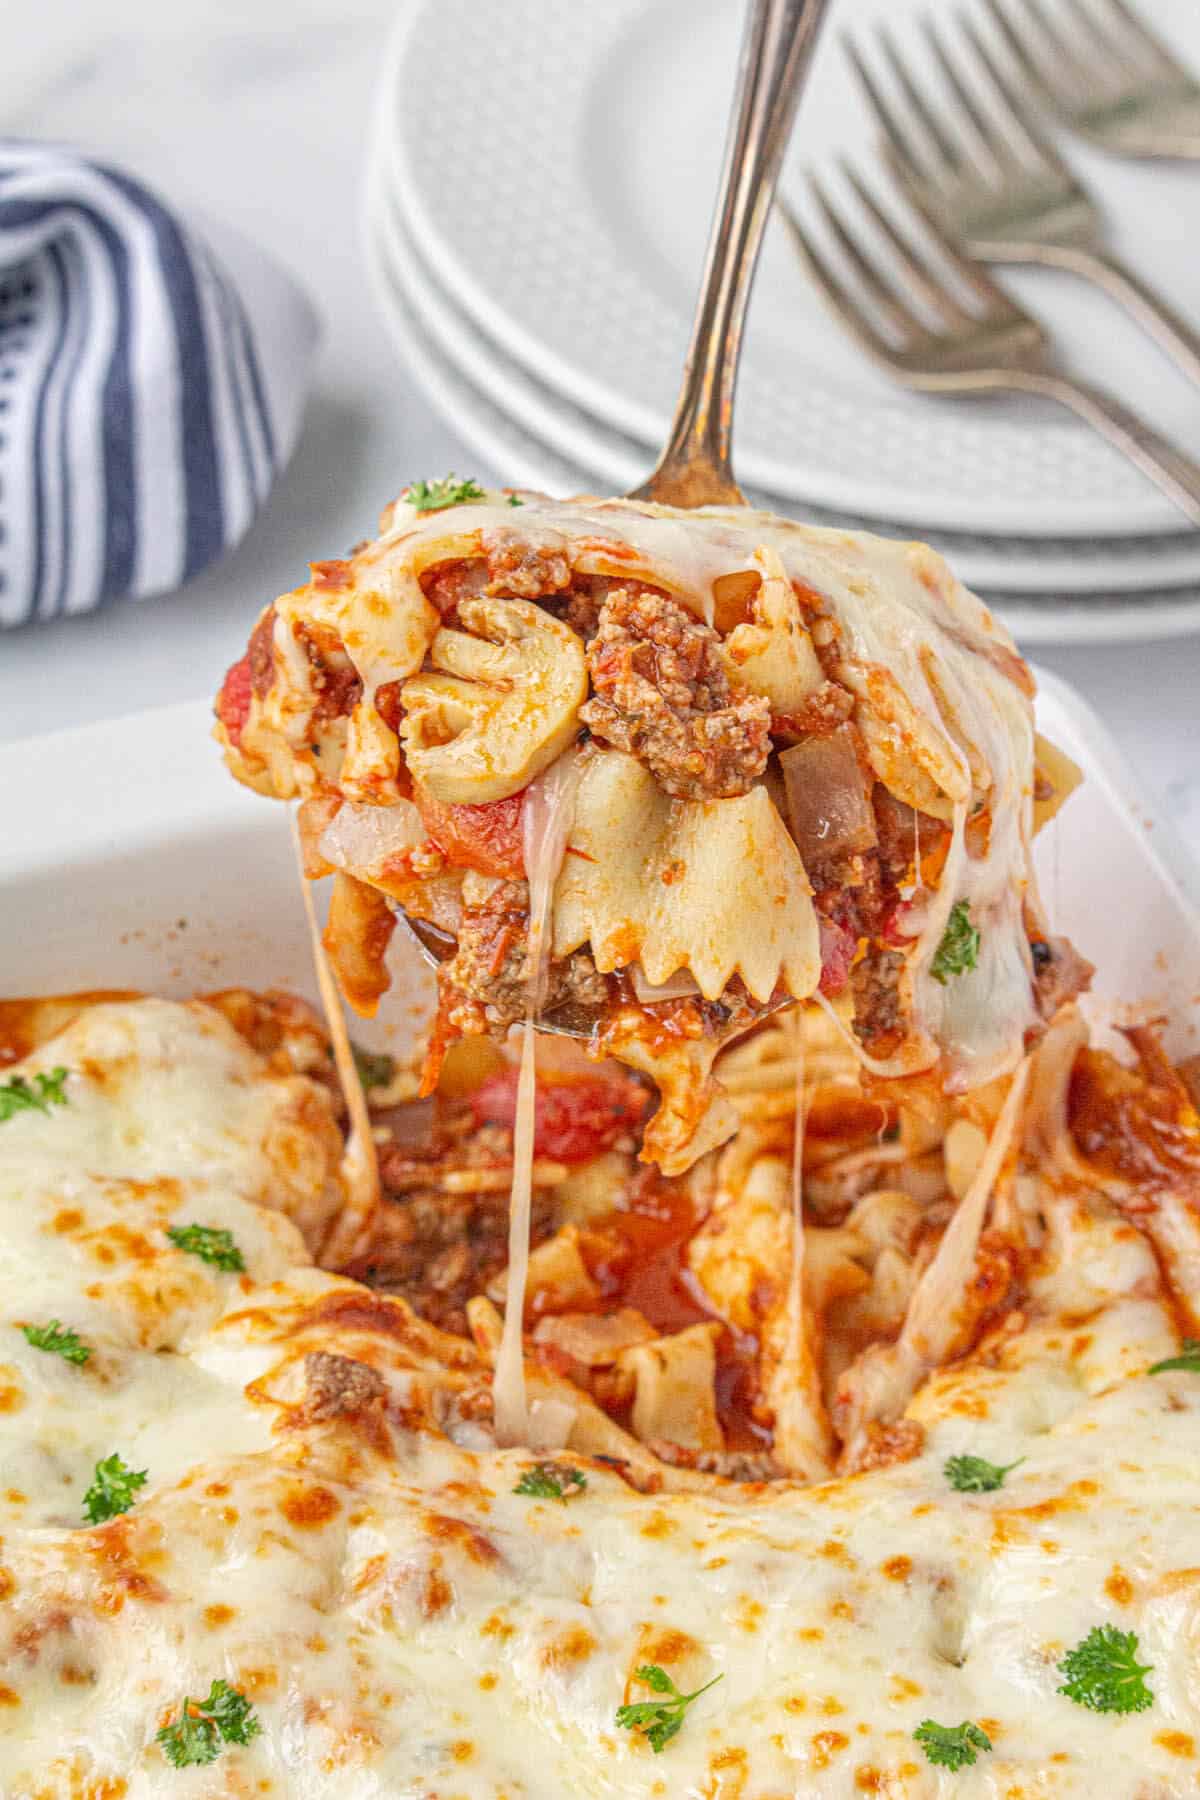 Baked pasta in a casserole dish with a serving spoon taking a big scoop.